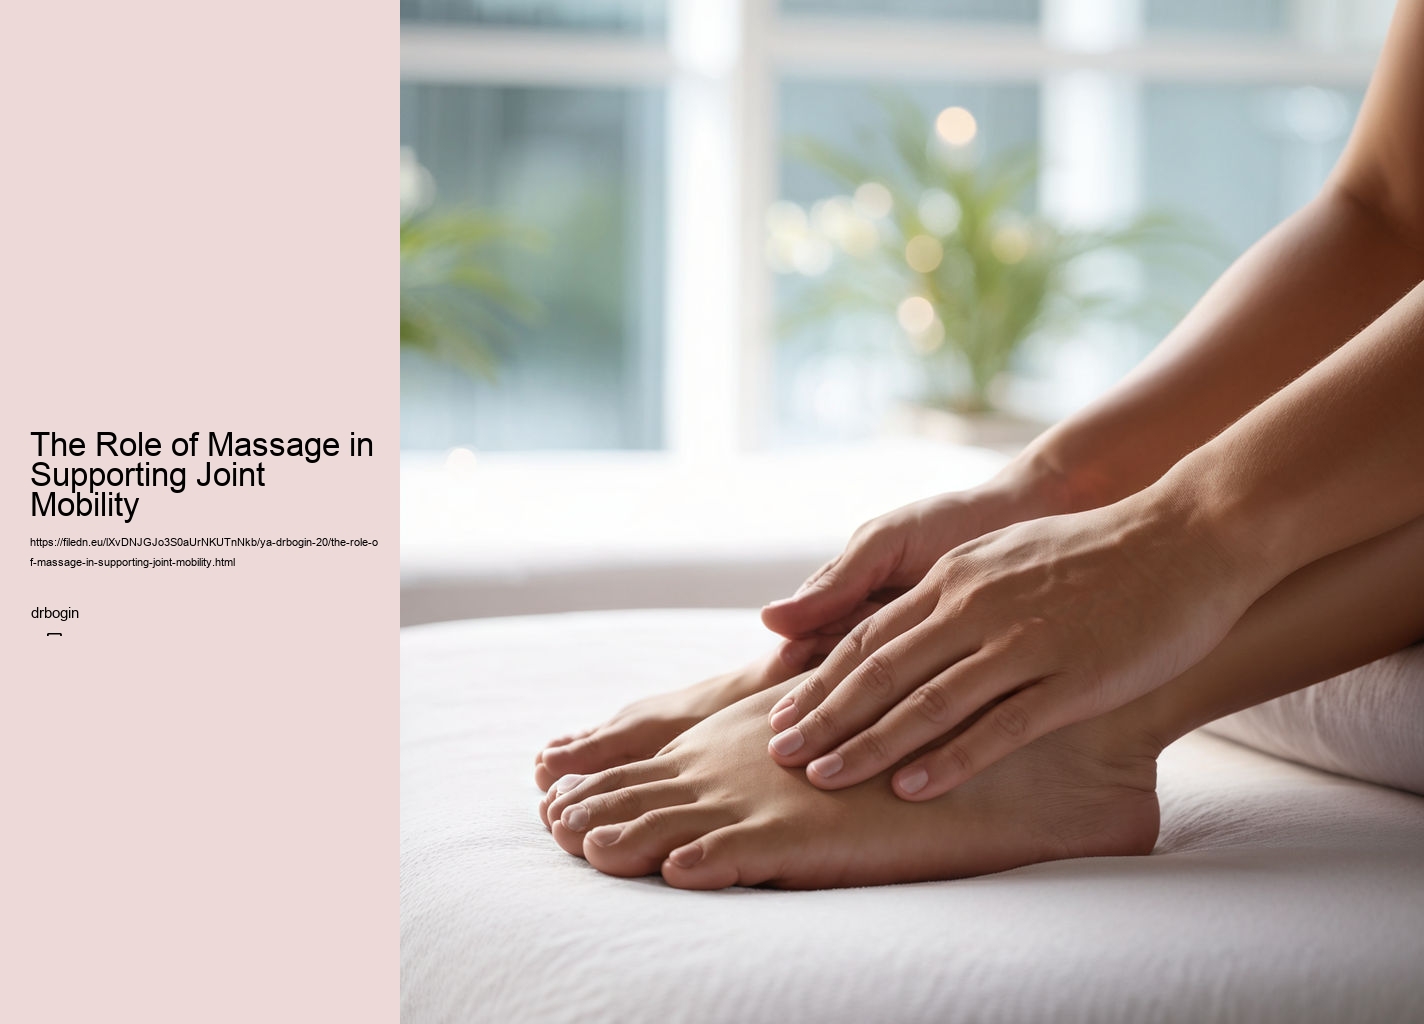 The Role of Massage in Supporting Joint Mobility